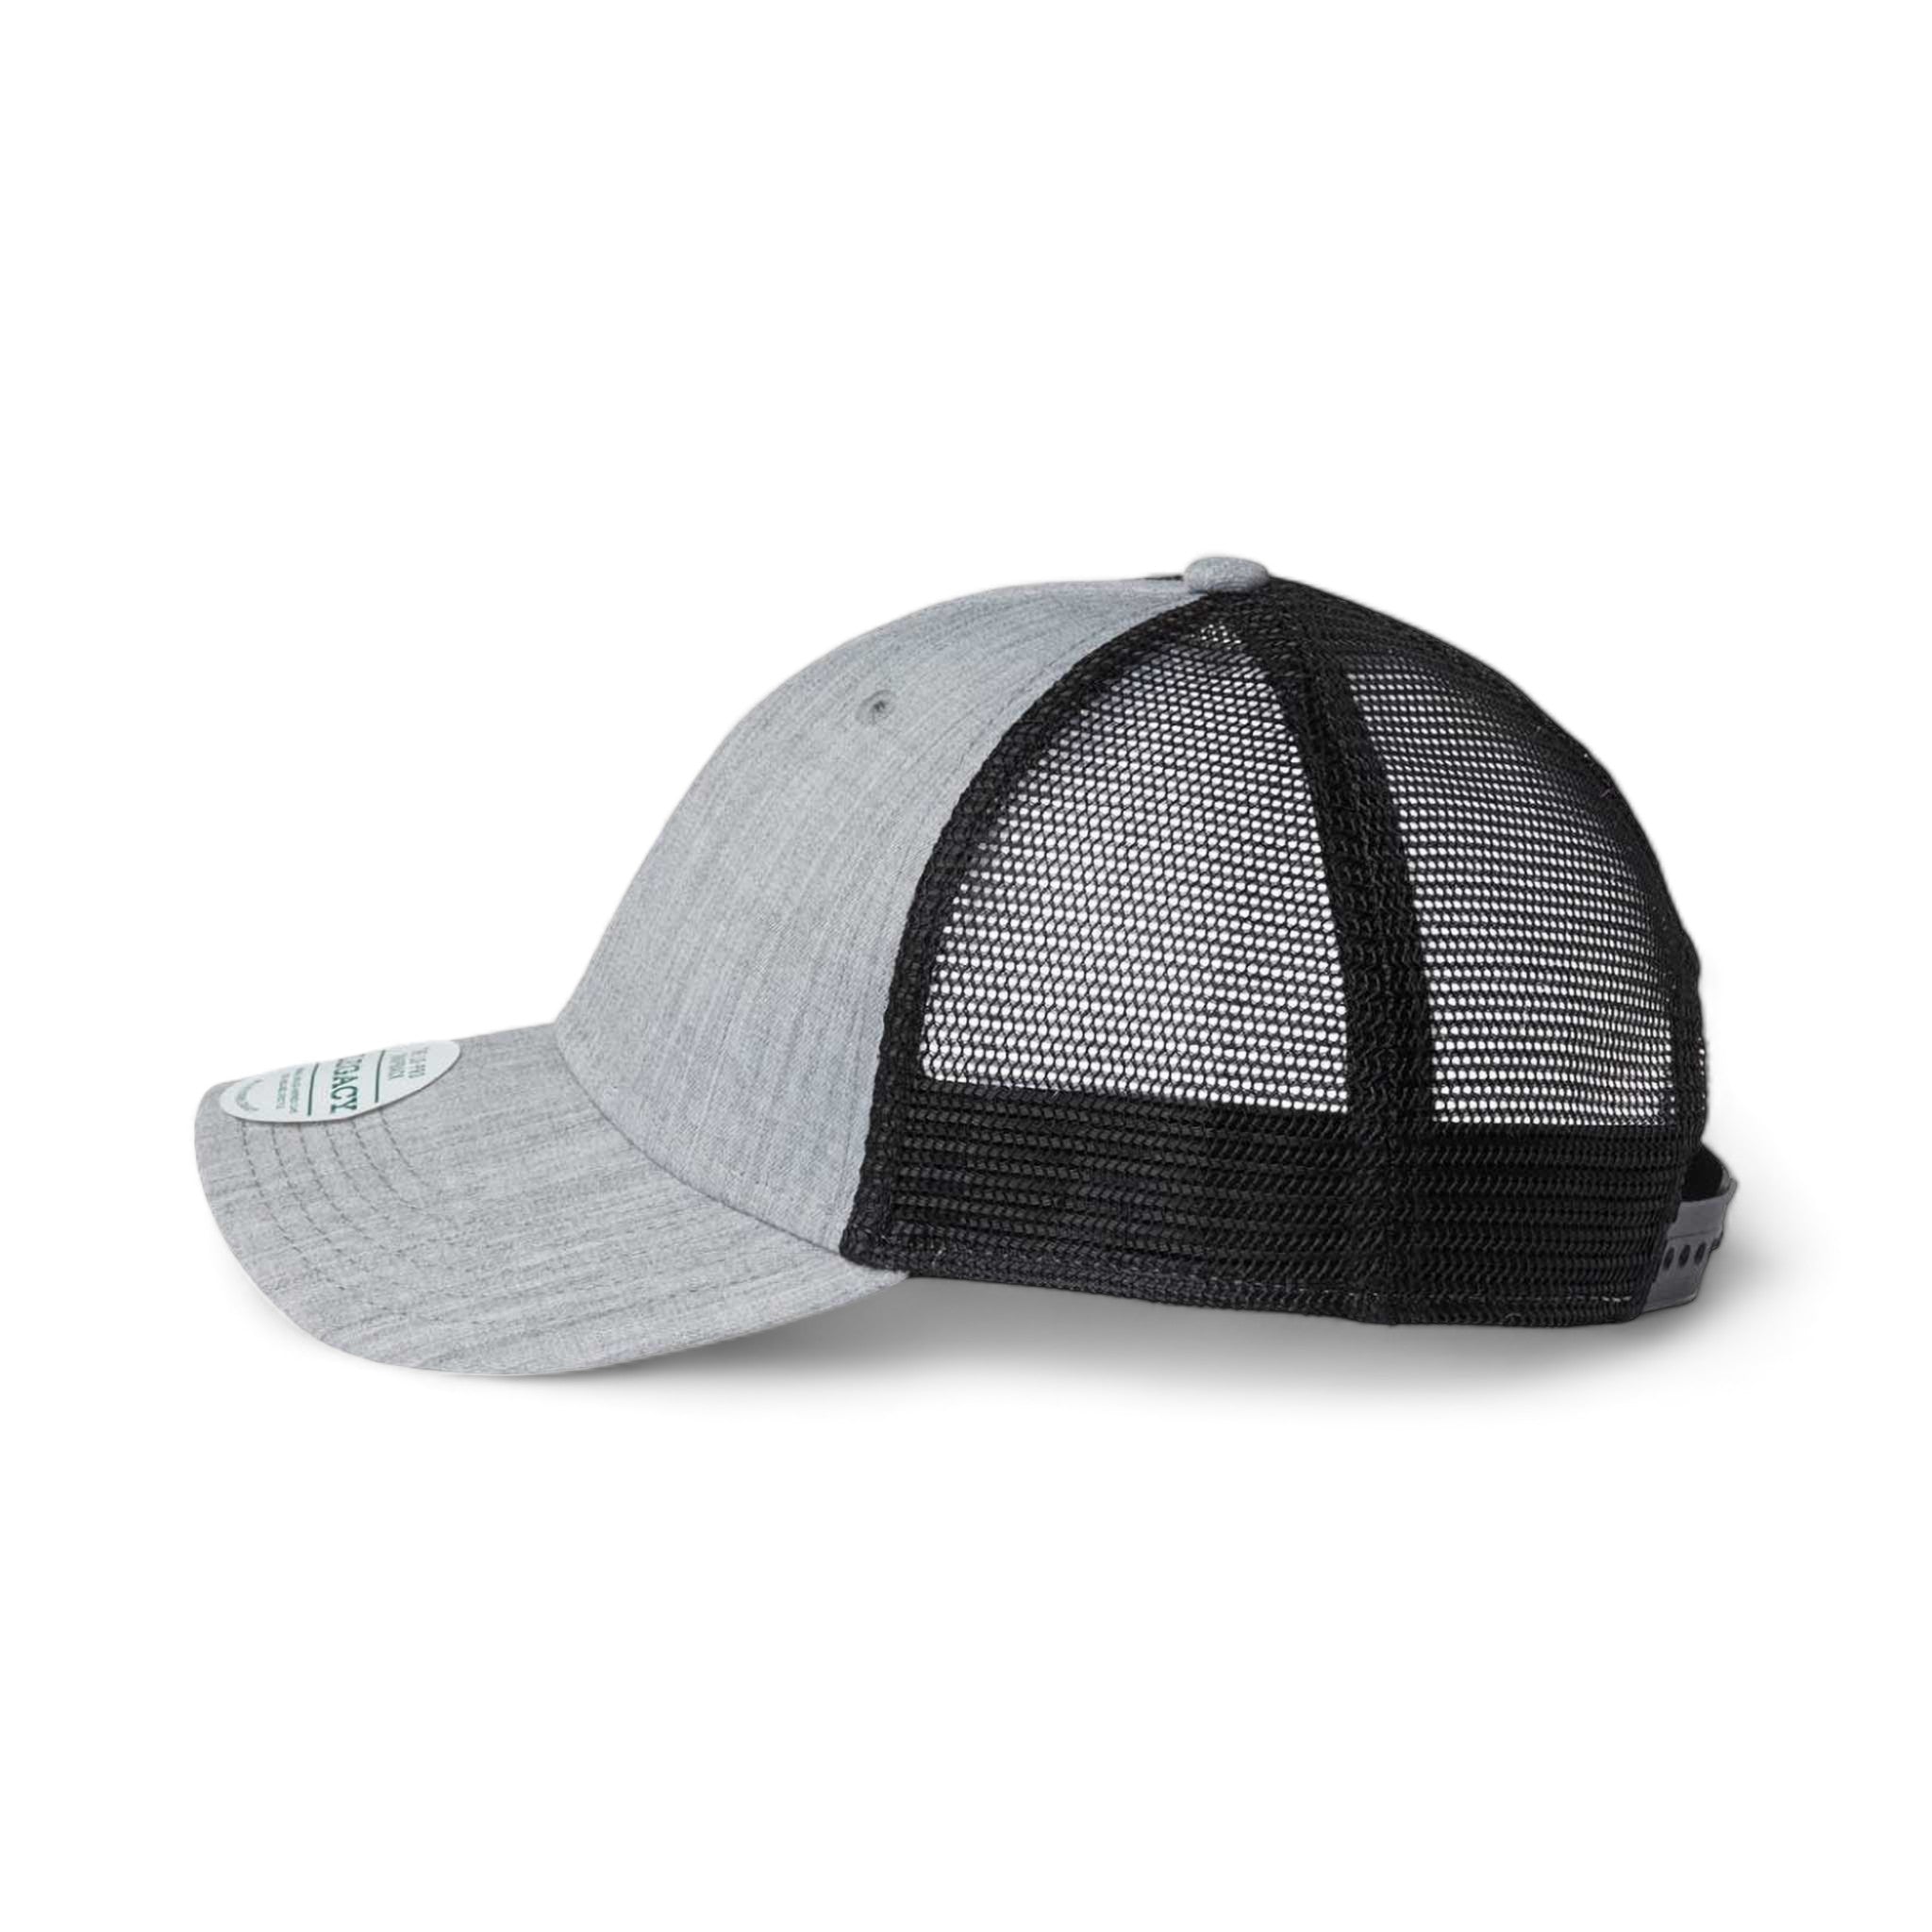 Side view of LEGACY LPS custom hat in heather grey and black